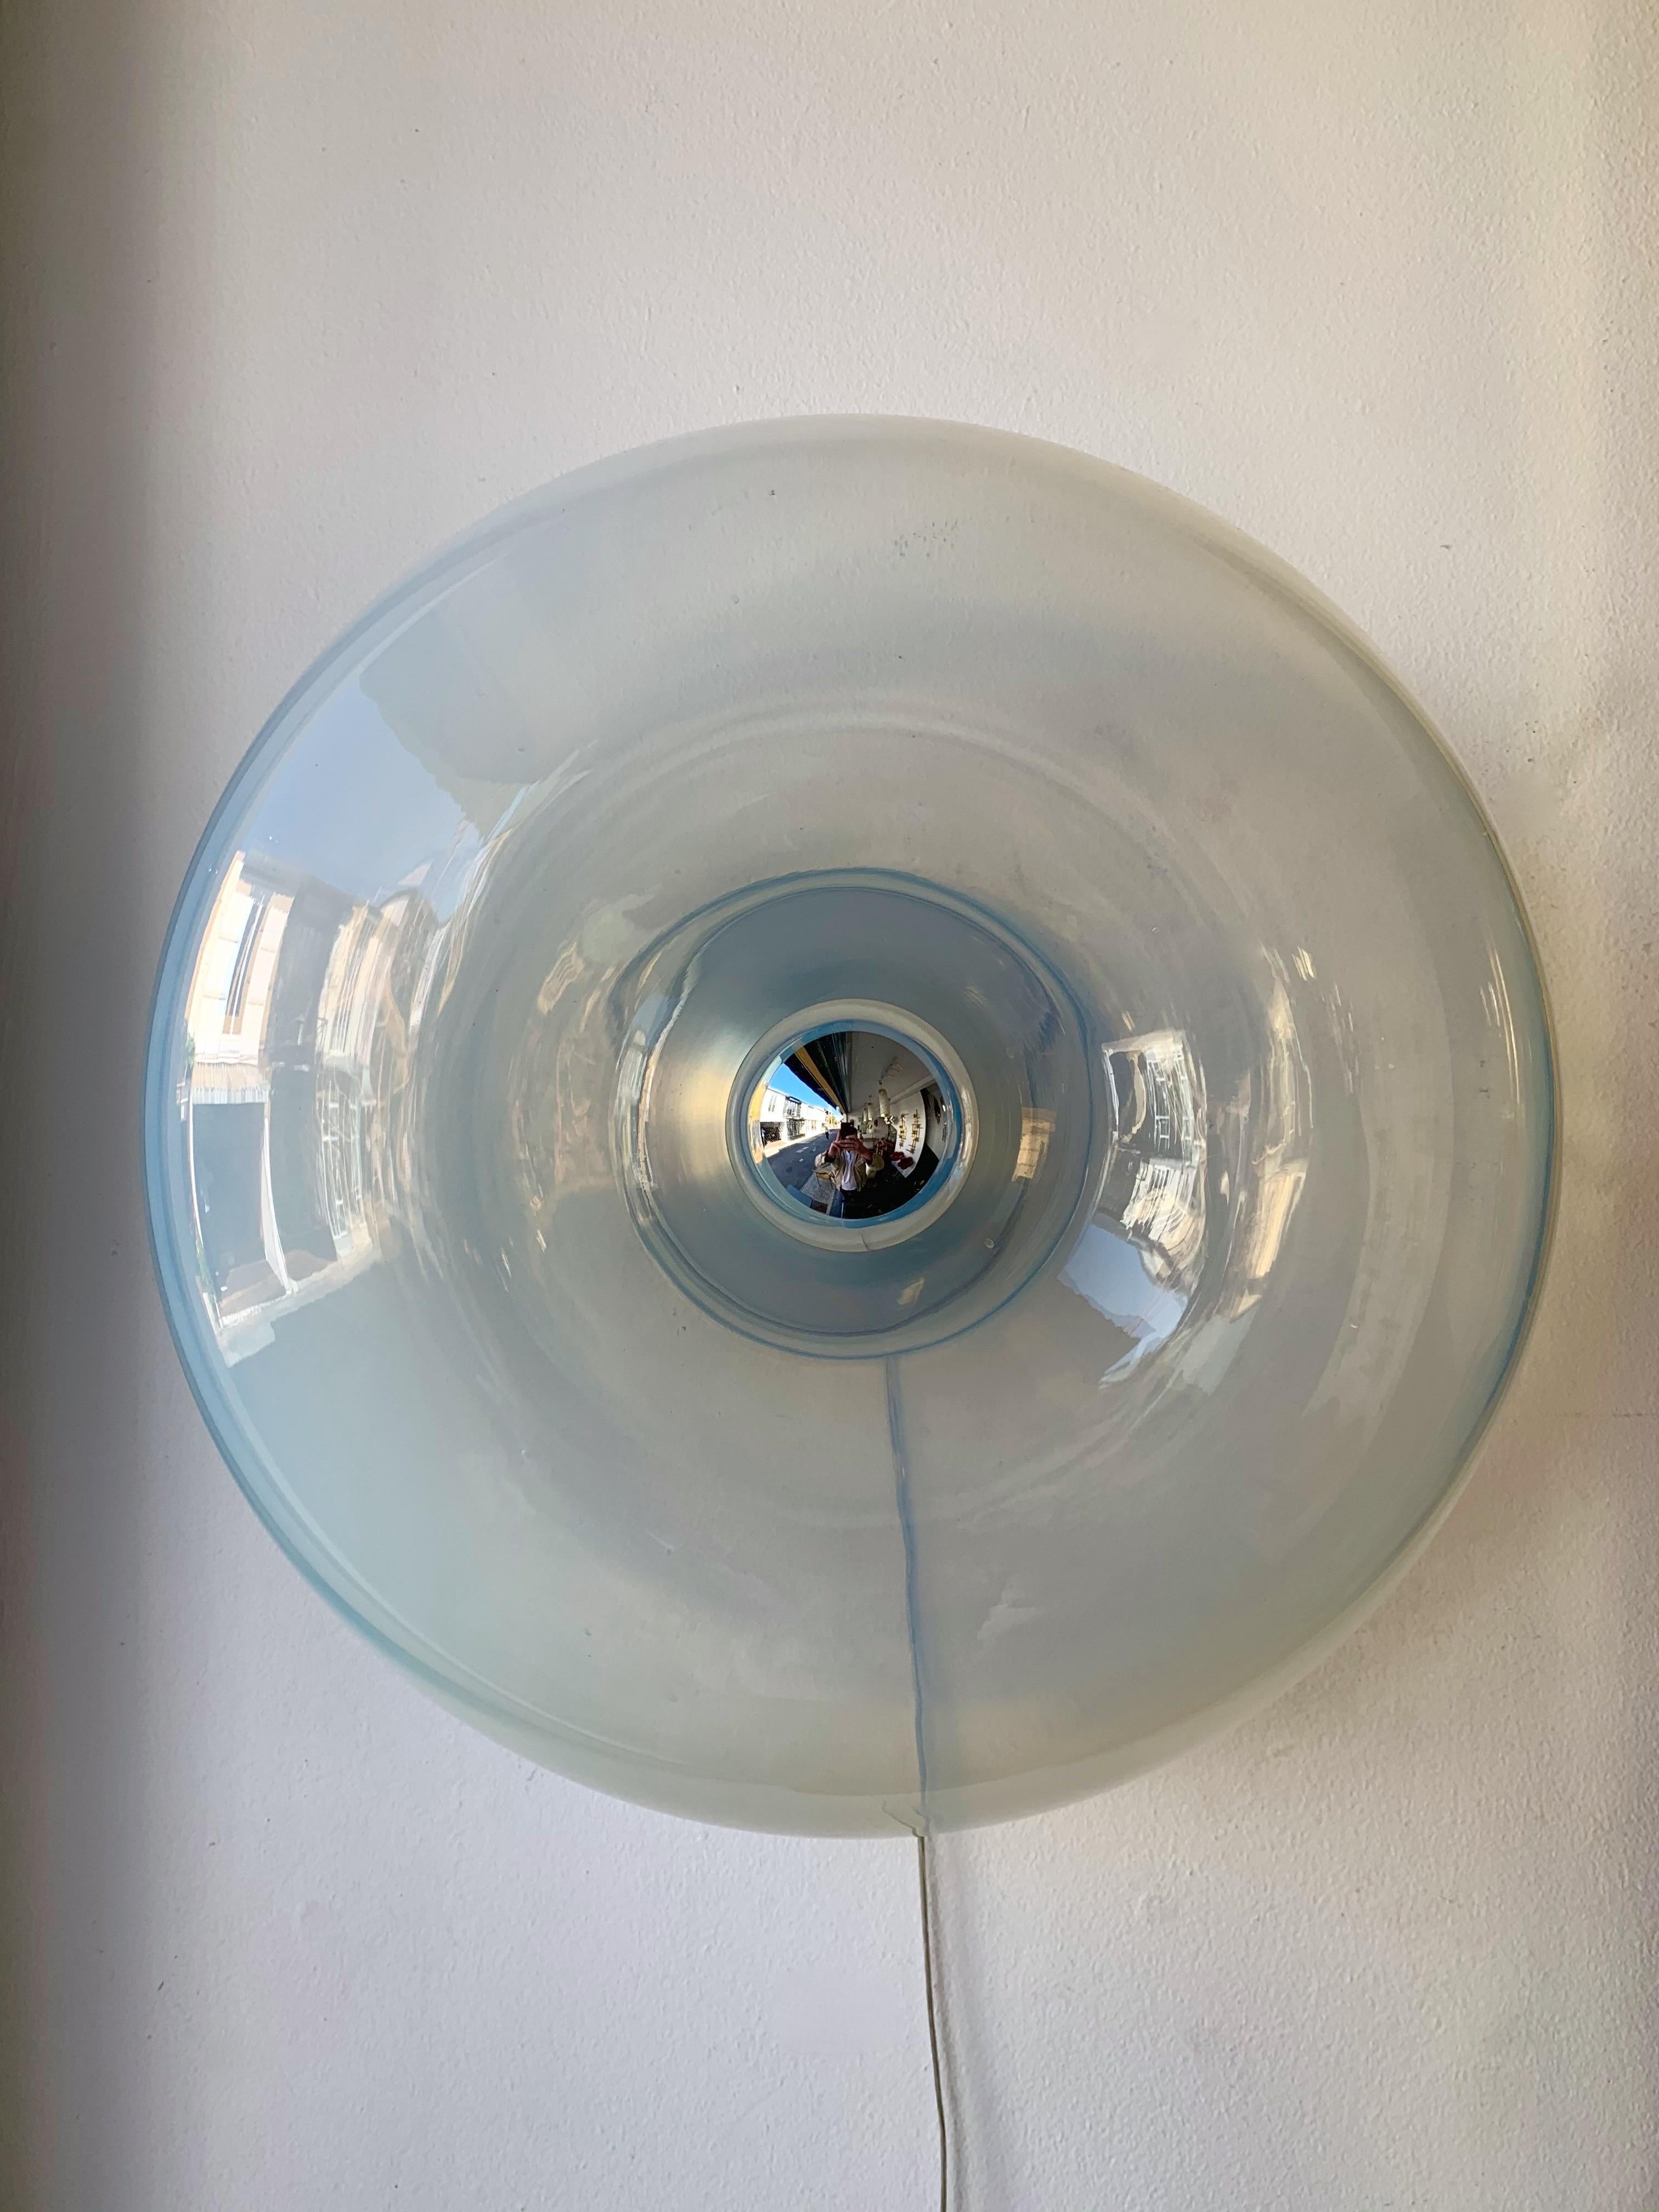 Rare Mid-Century Modern Space Age pair of sconces wall lights lamps or Flush mount ceiling or table lamps in blue opal blown Murano glass and silver metal by the designer Giusto Toso for the editor Leucos. Documentation available. Famous design like